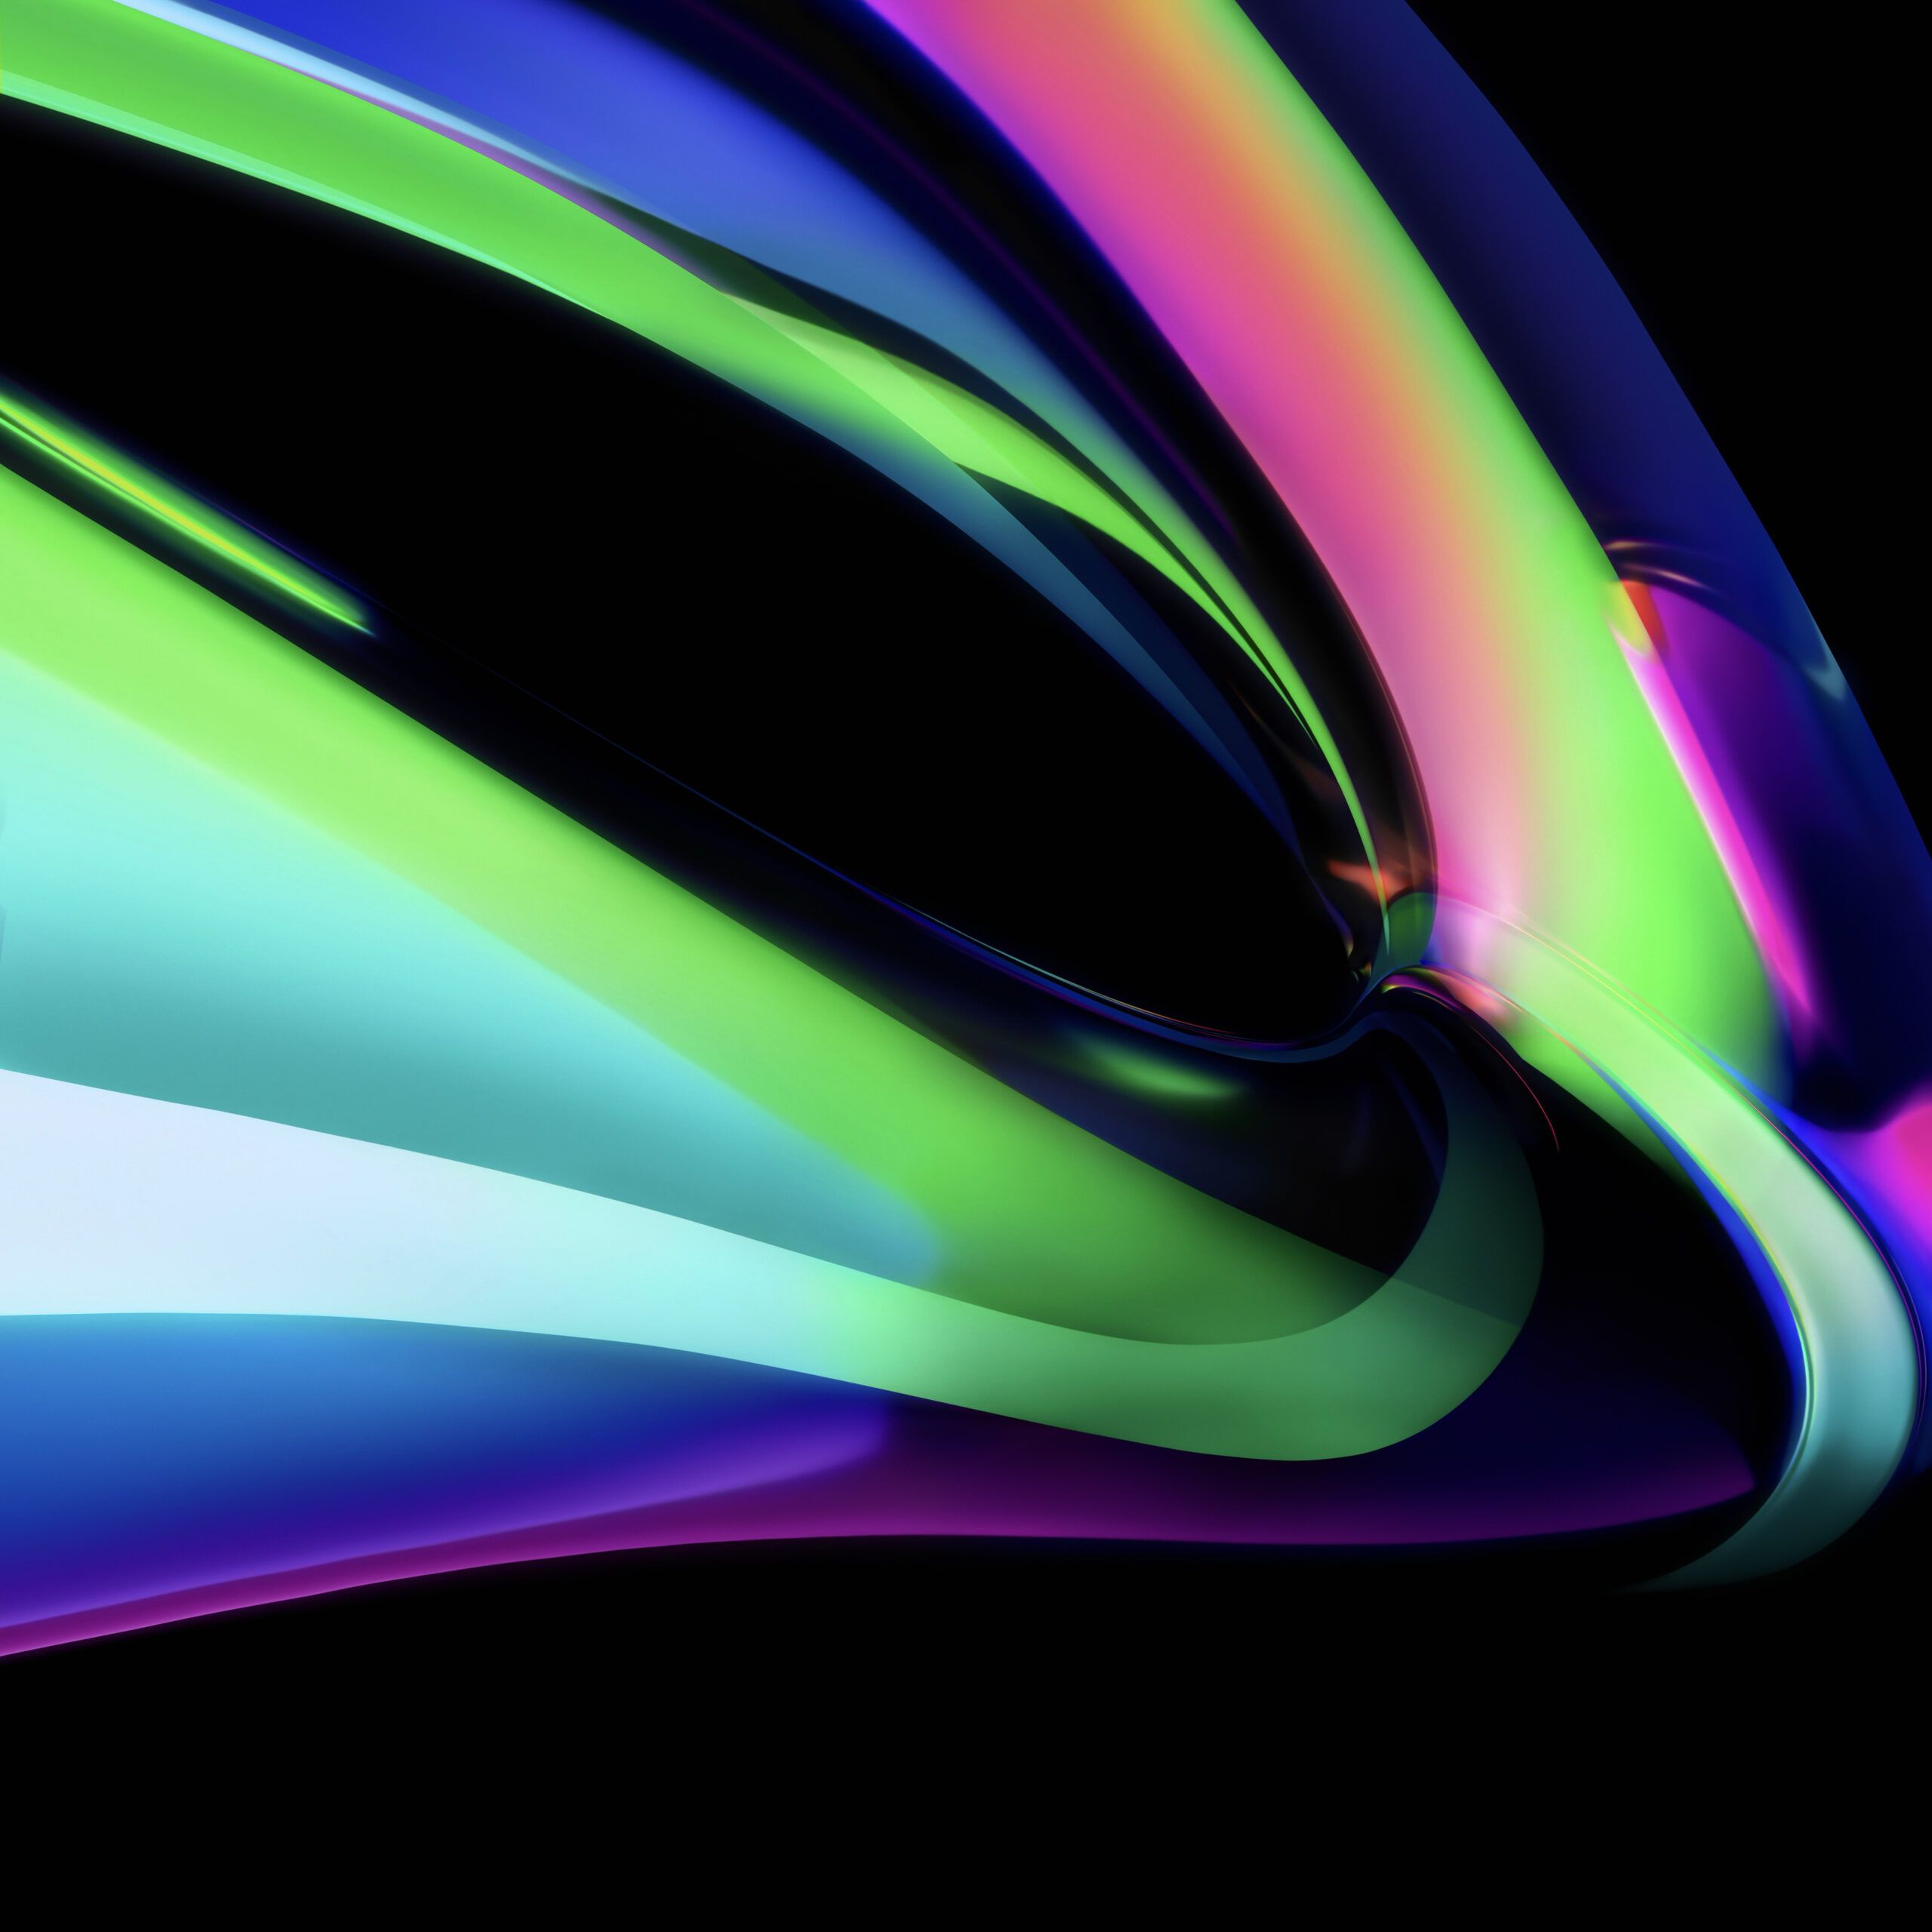 Download the official Apple M1 wallpaper here